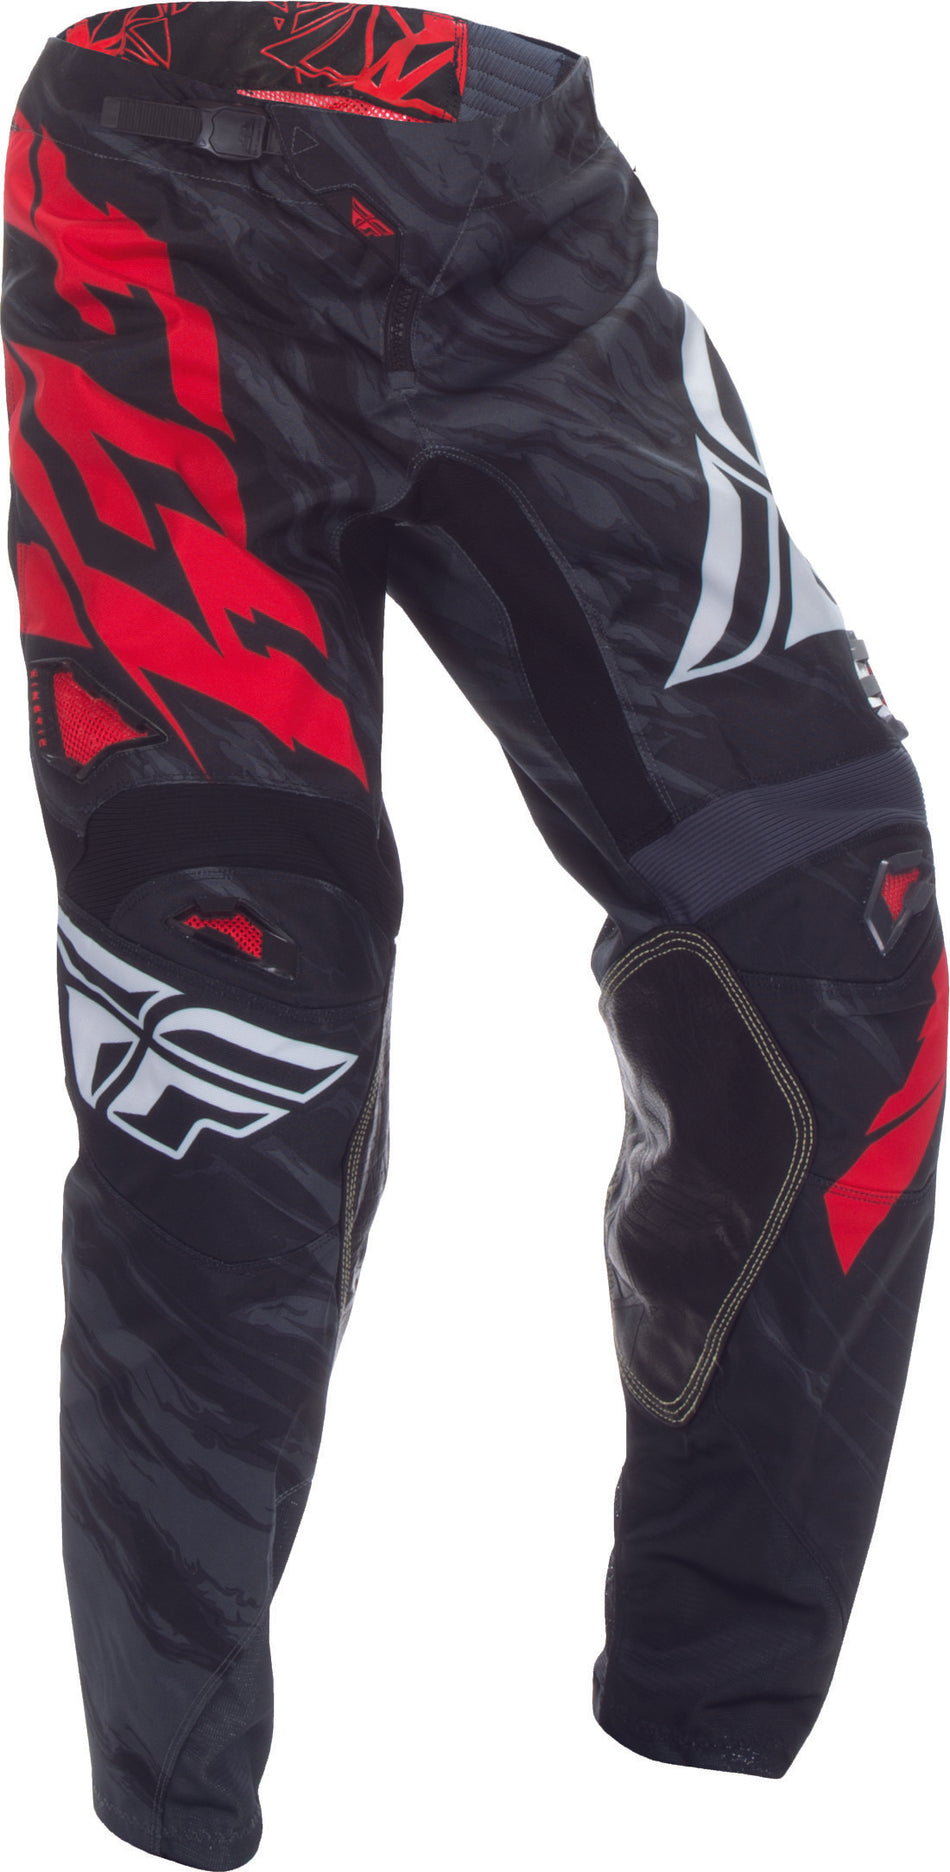 FLY RACING Kinetic Relapse Pant Black/Red Sz 18 370-43018